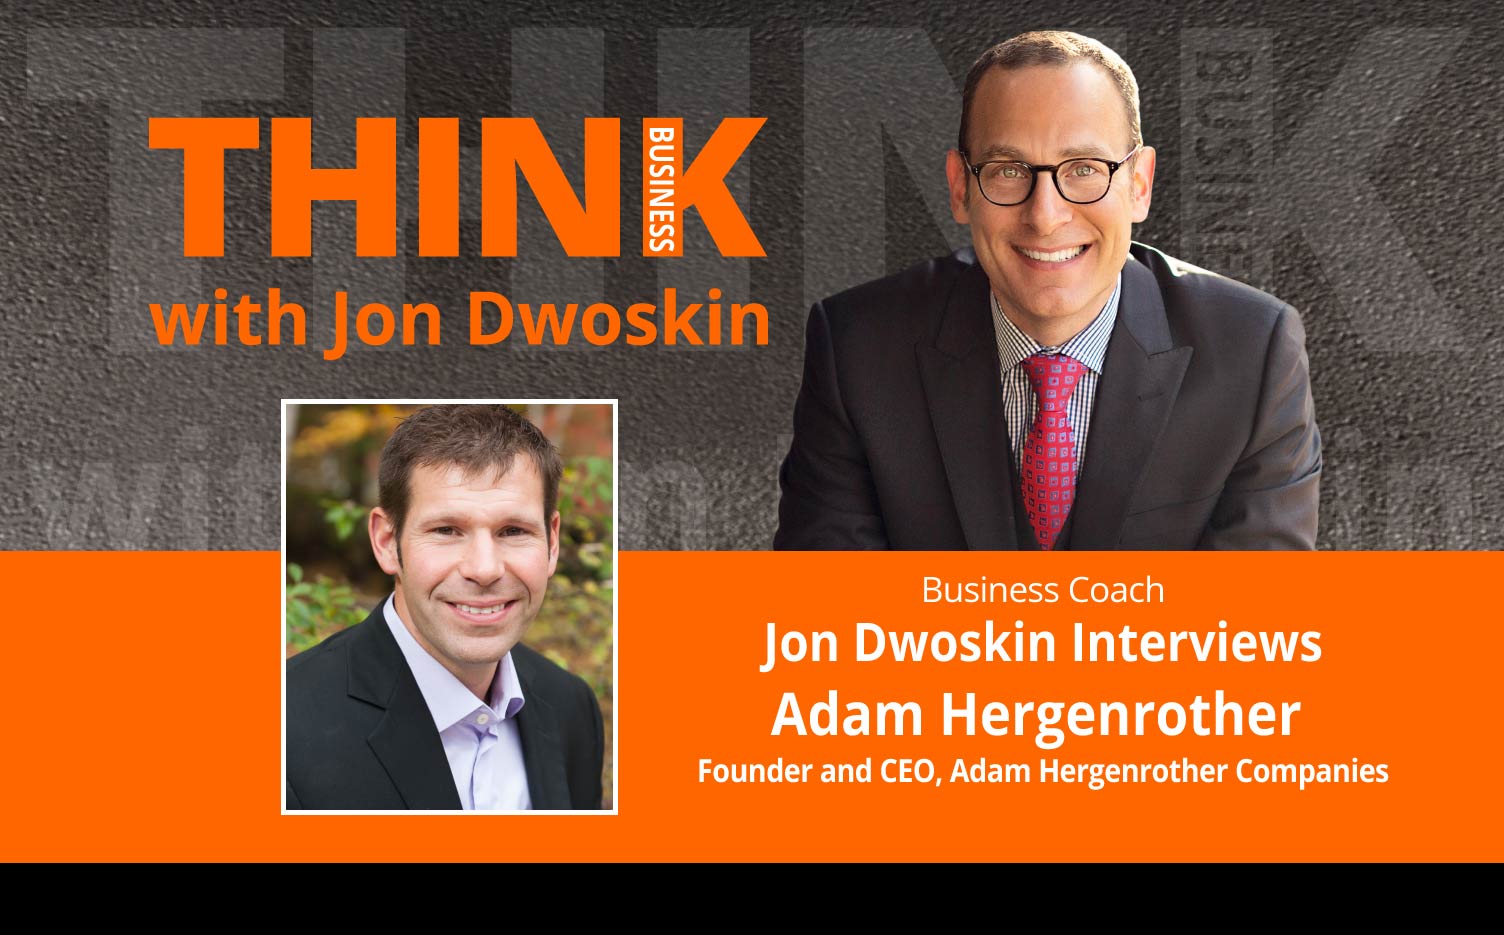 THINK Business Podcast: Jon Dwoskin Interviews Adam Hergenrother, Founder and CEO, Adam Hergenrother Companies